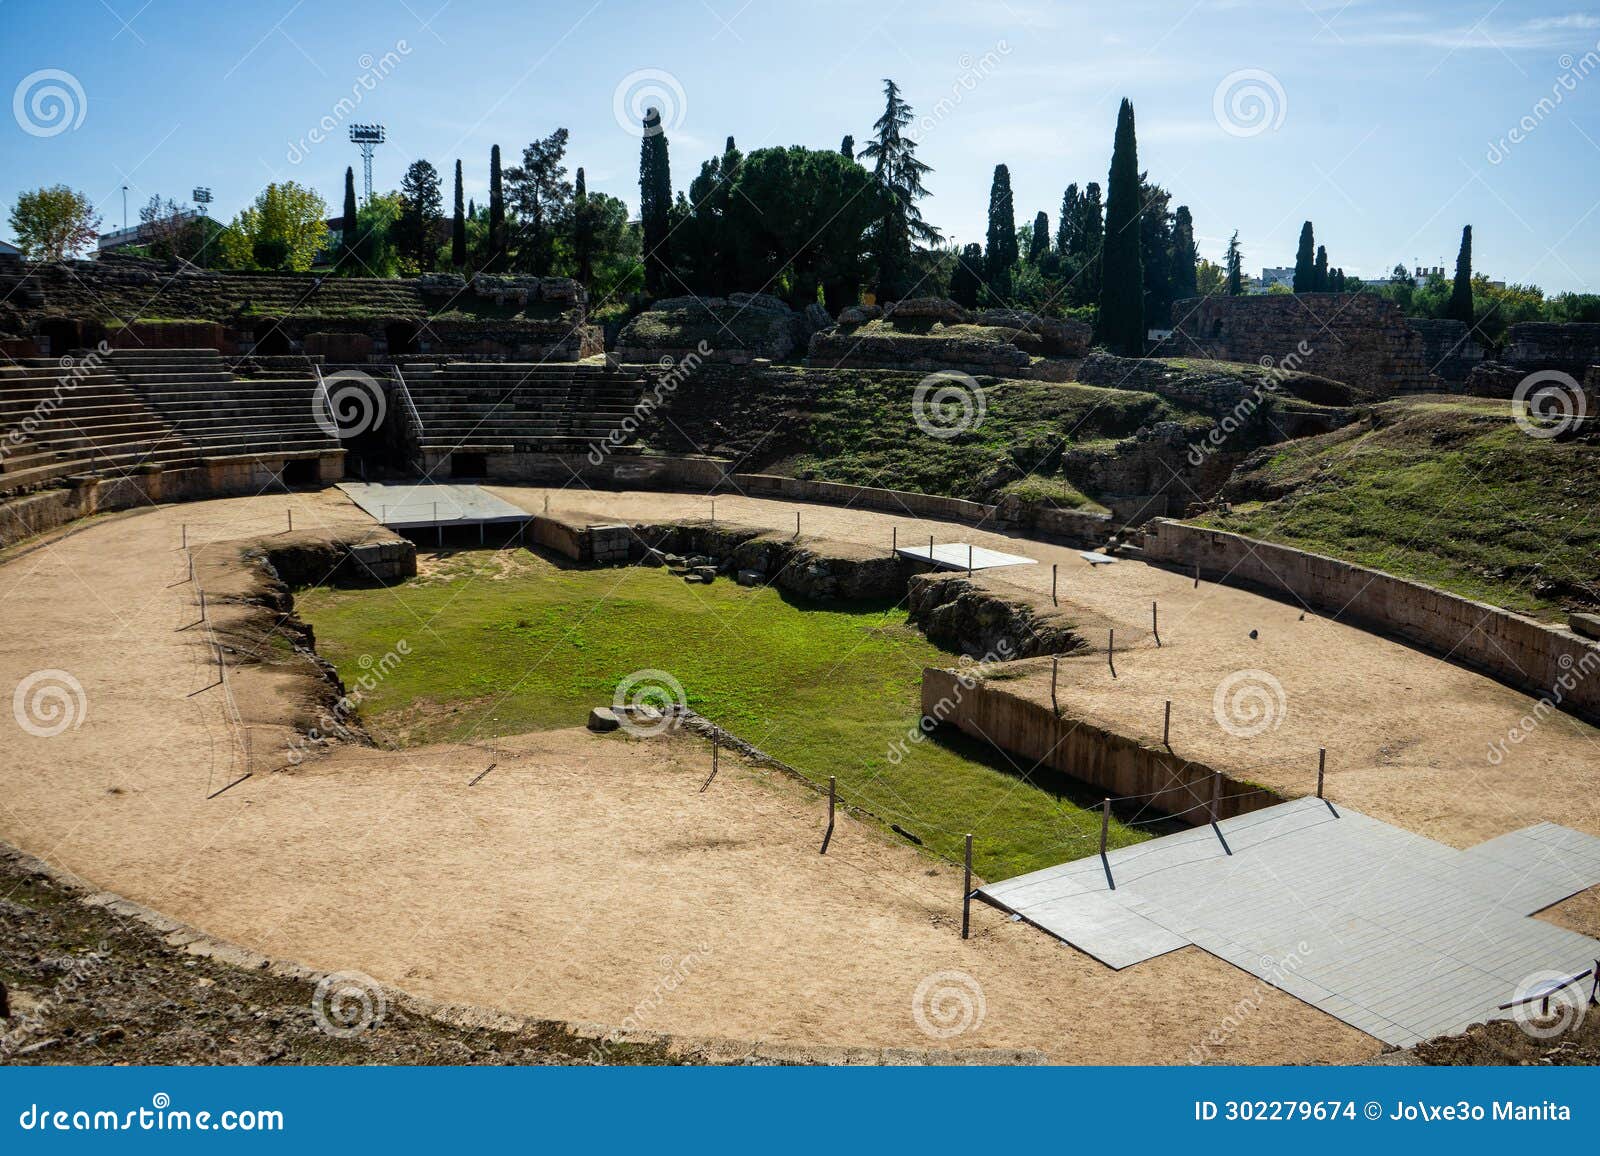 stunning view of mÃ©rida's roman amphitheater, a historical gem showcasing ancient architecture.